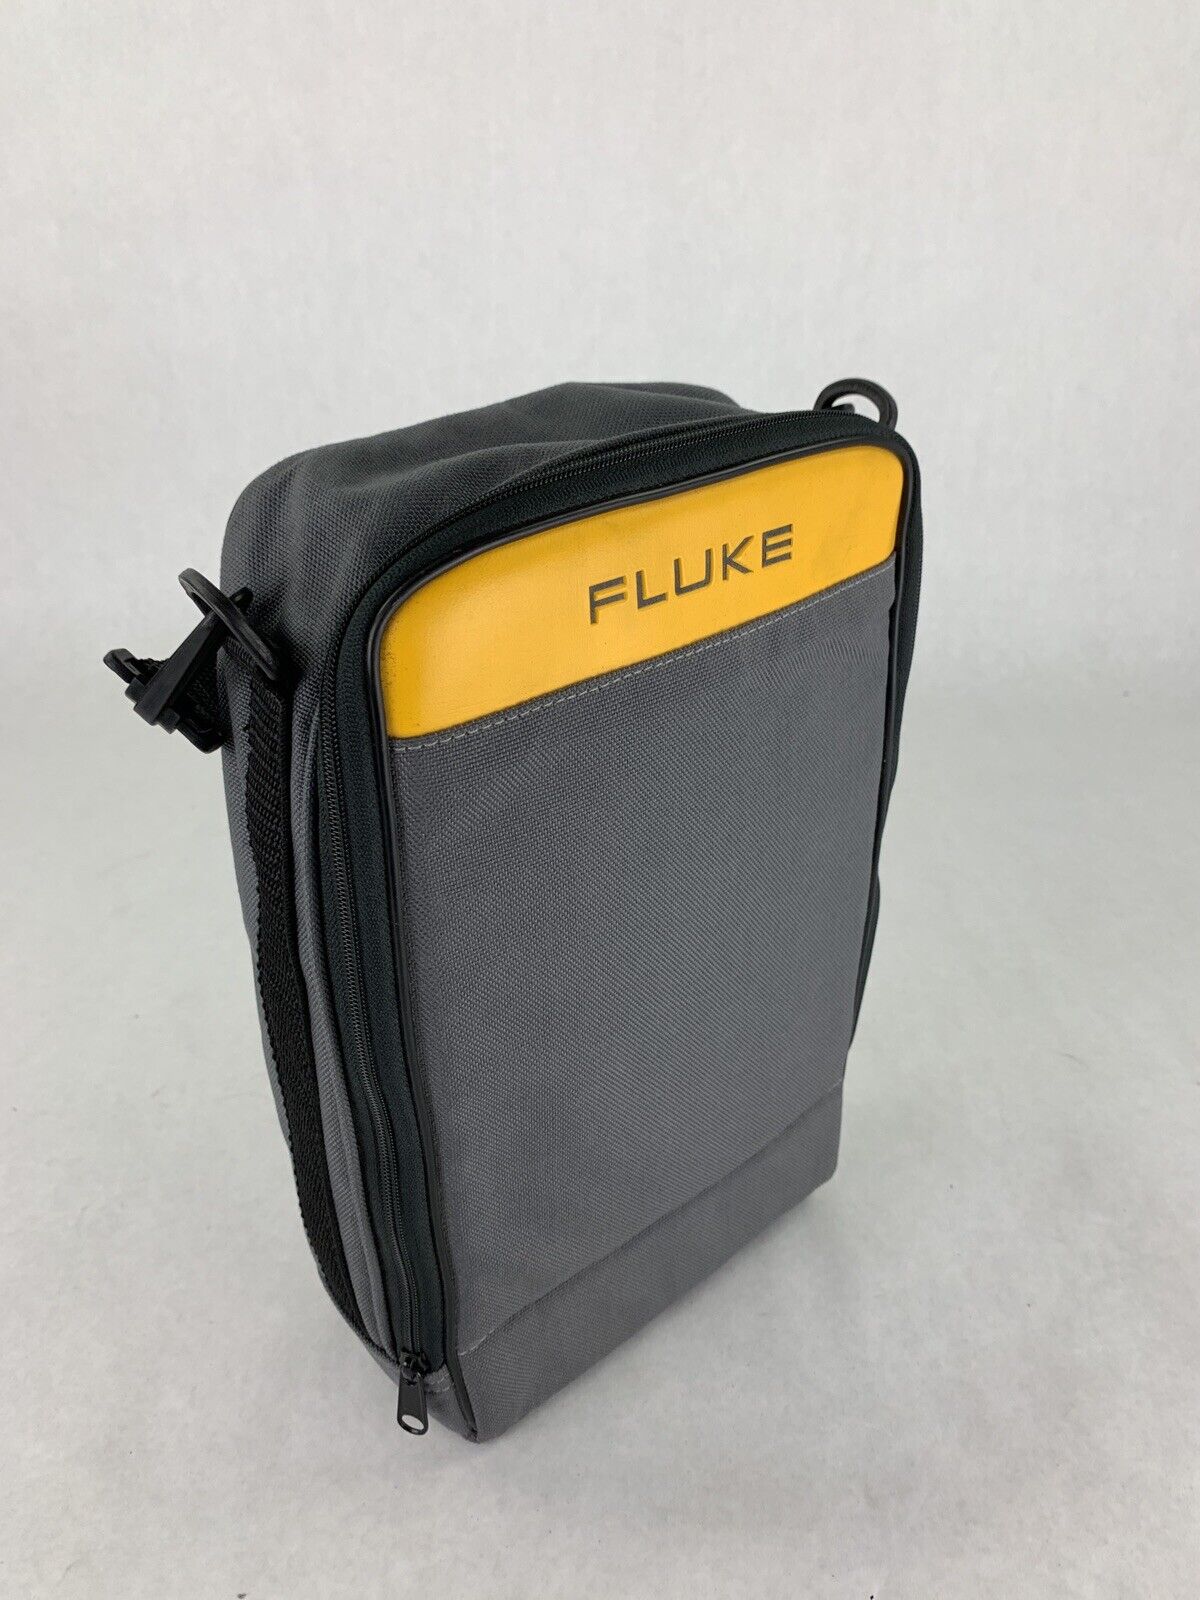 Fluke One Touch Series II Pro w/ A-Bug 140 and 1 & 4 Loop Backs Tested